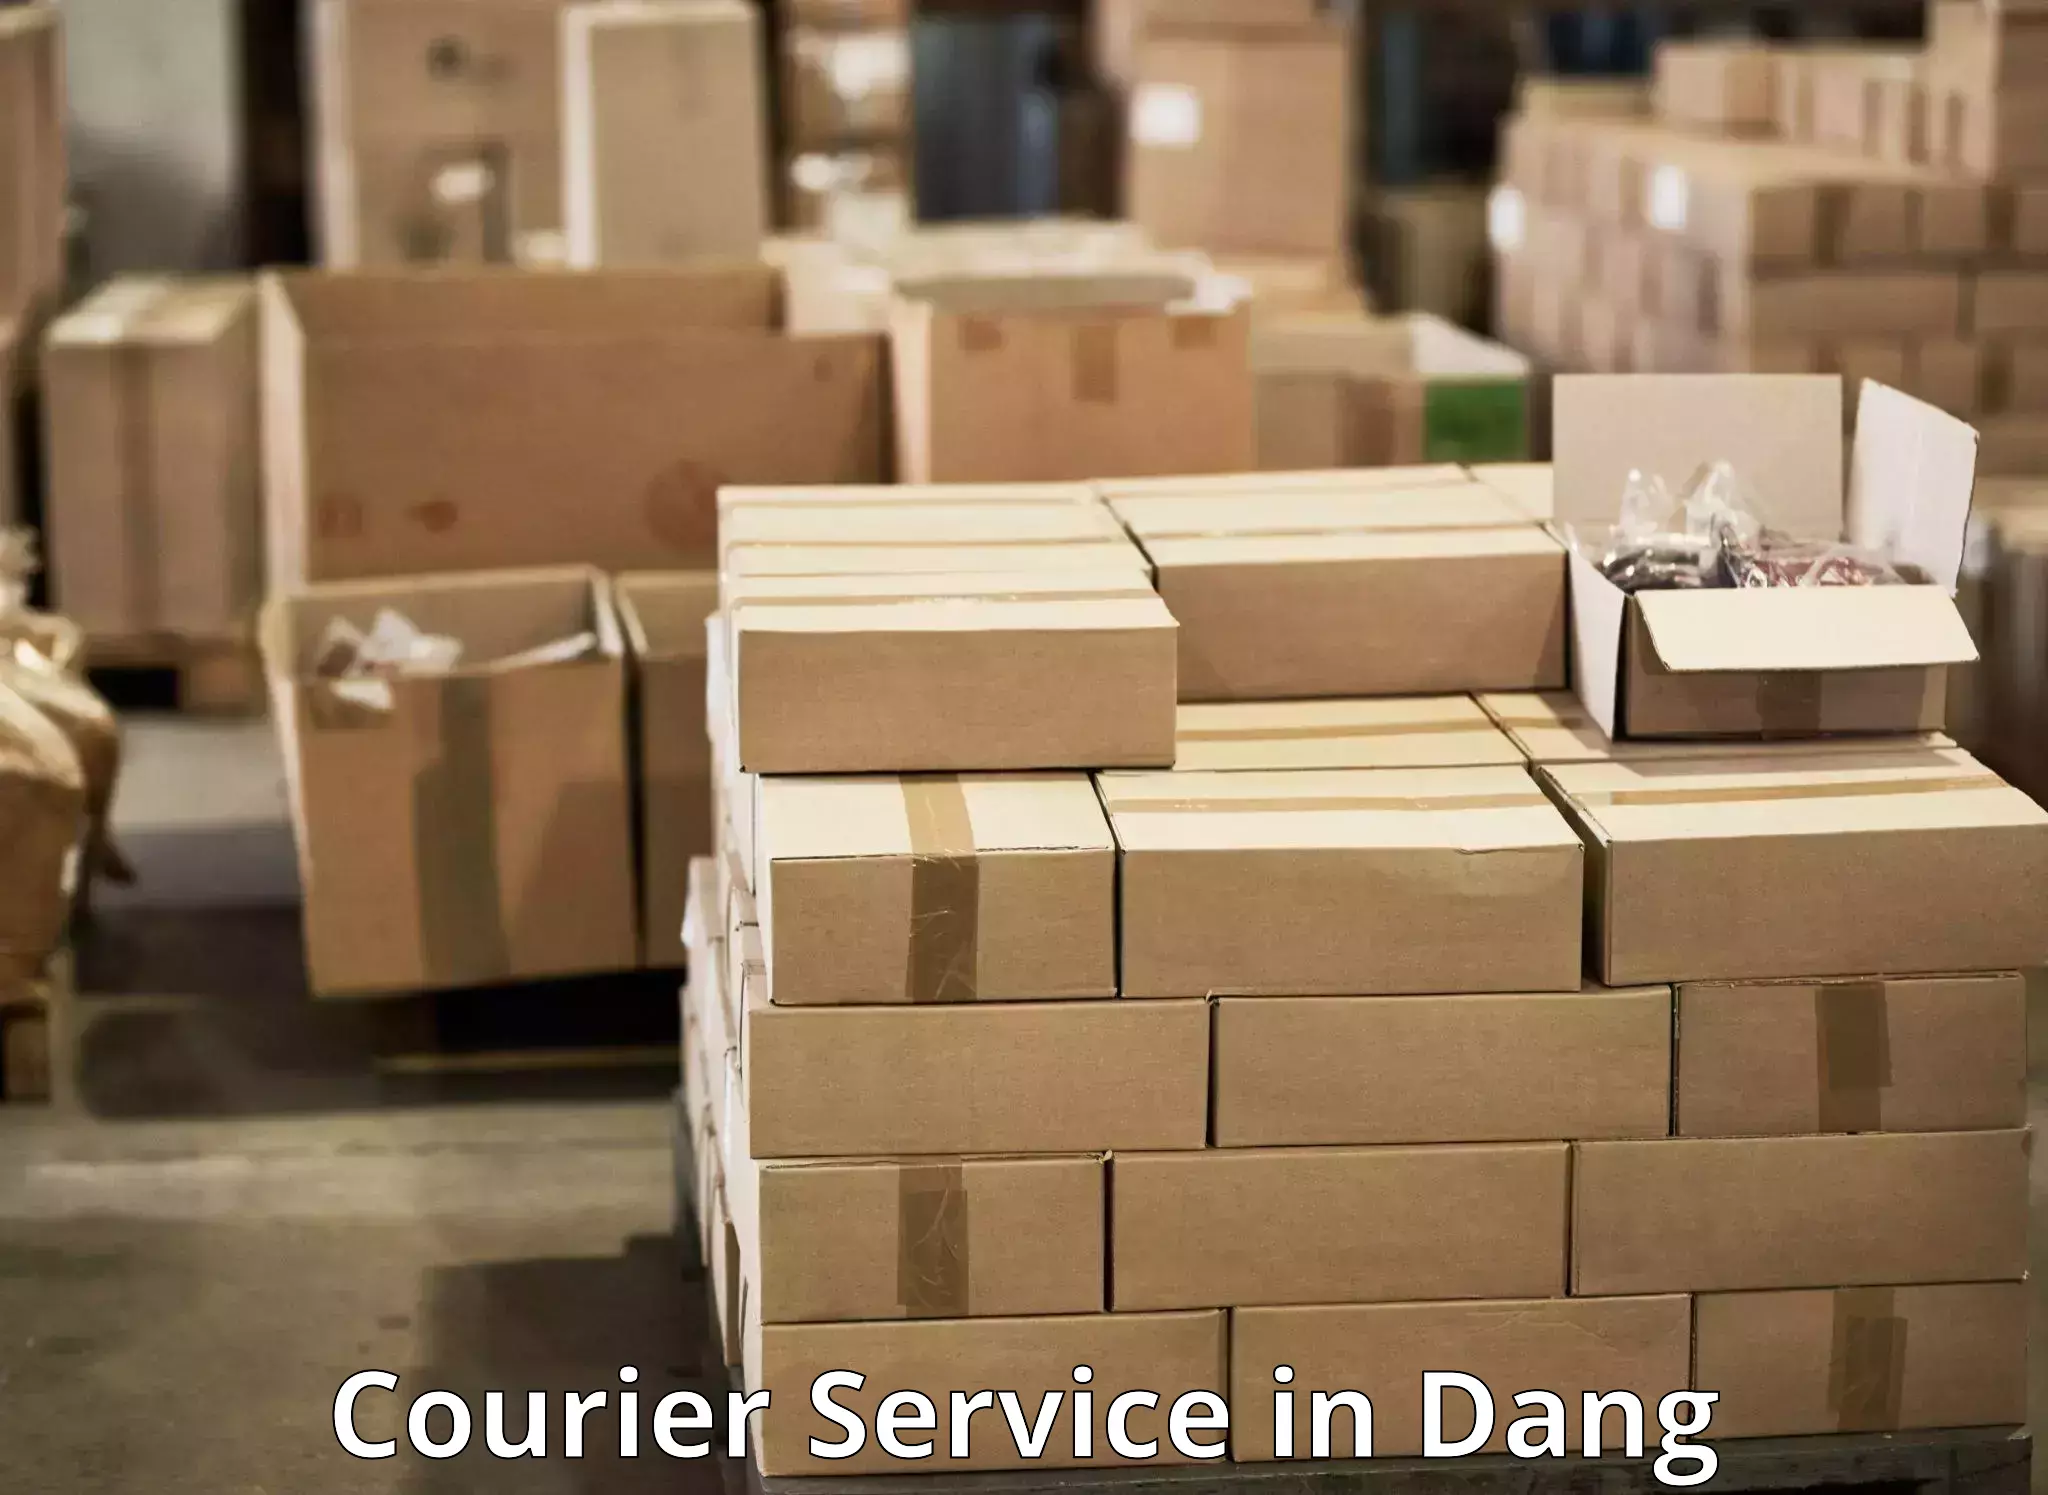 Delivery service partnership in Dang